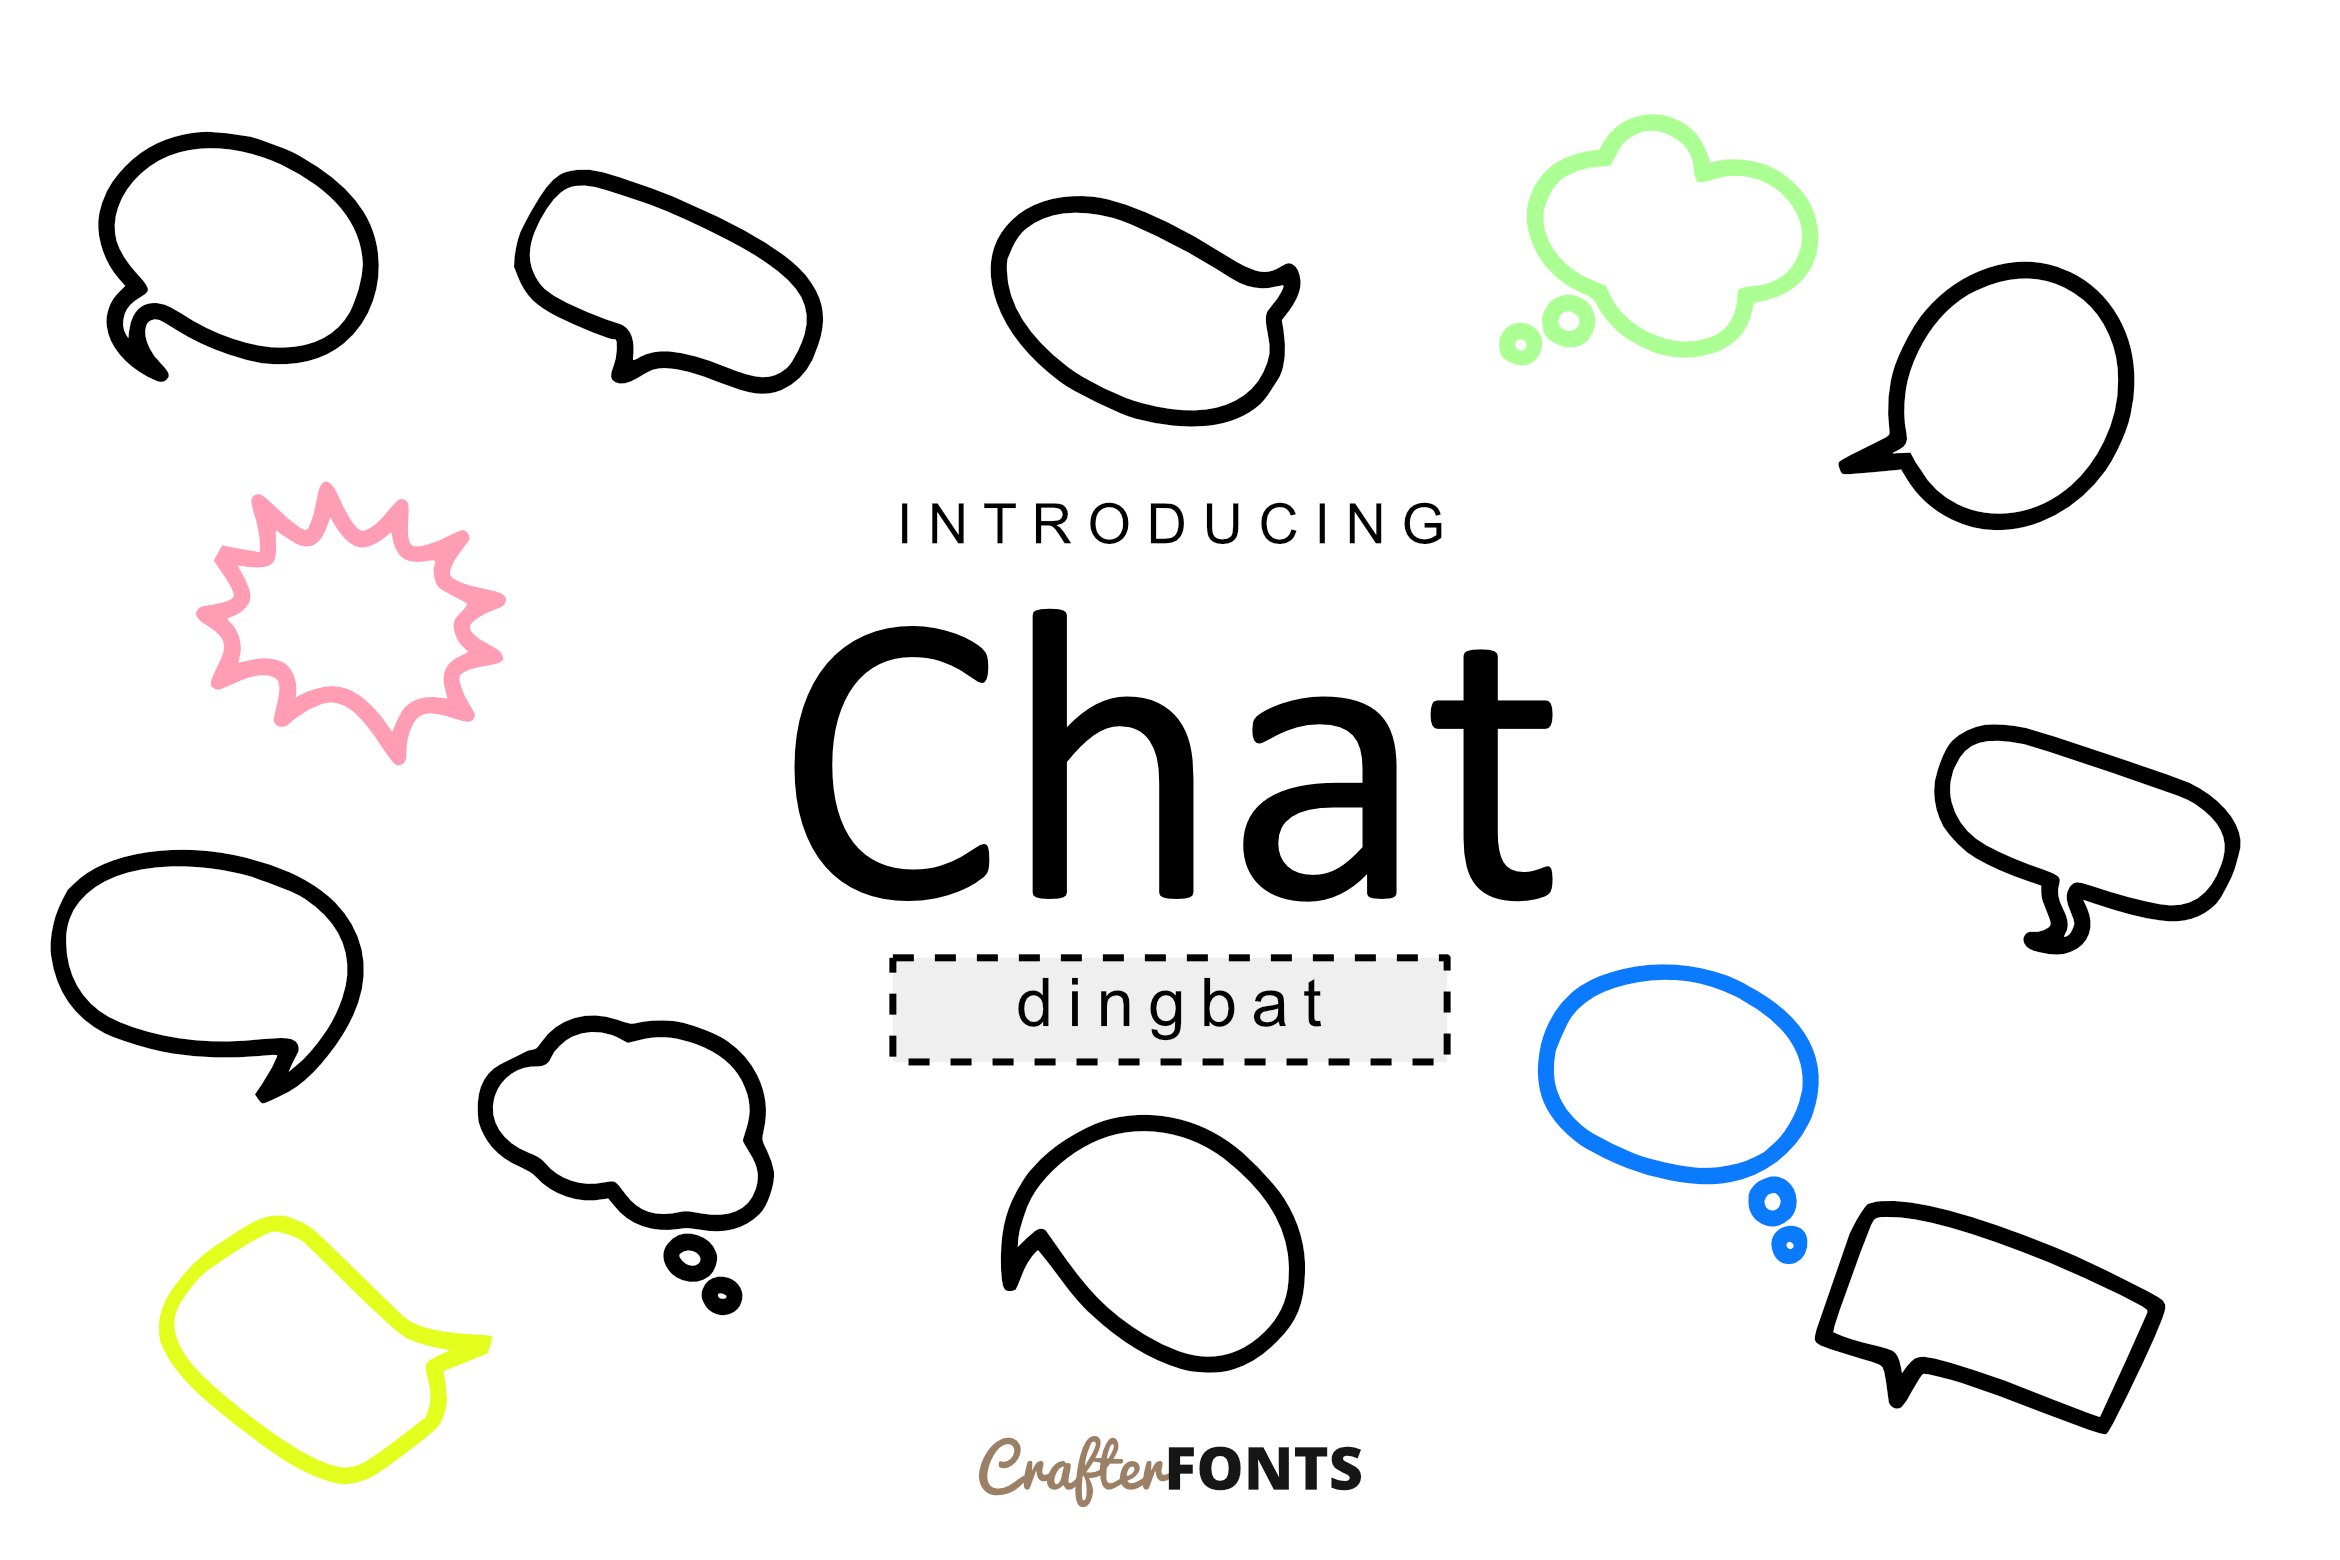 Chat Dingbat cover image.